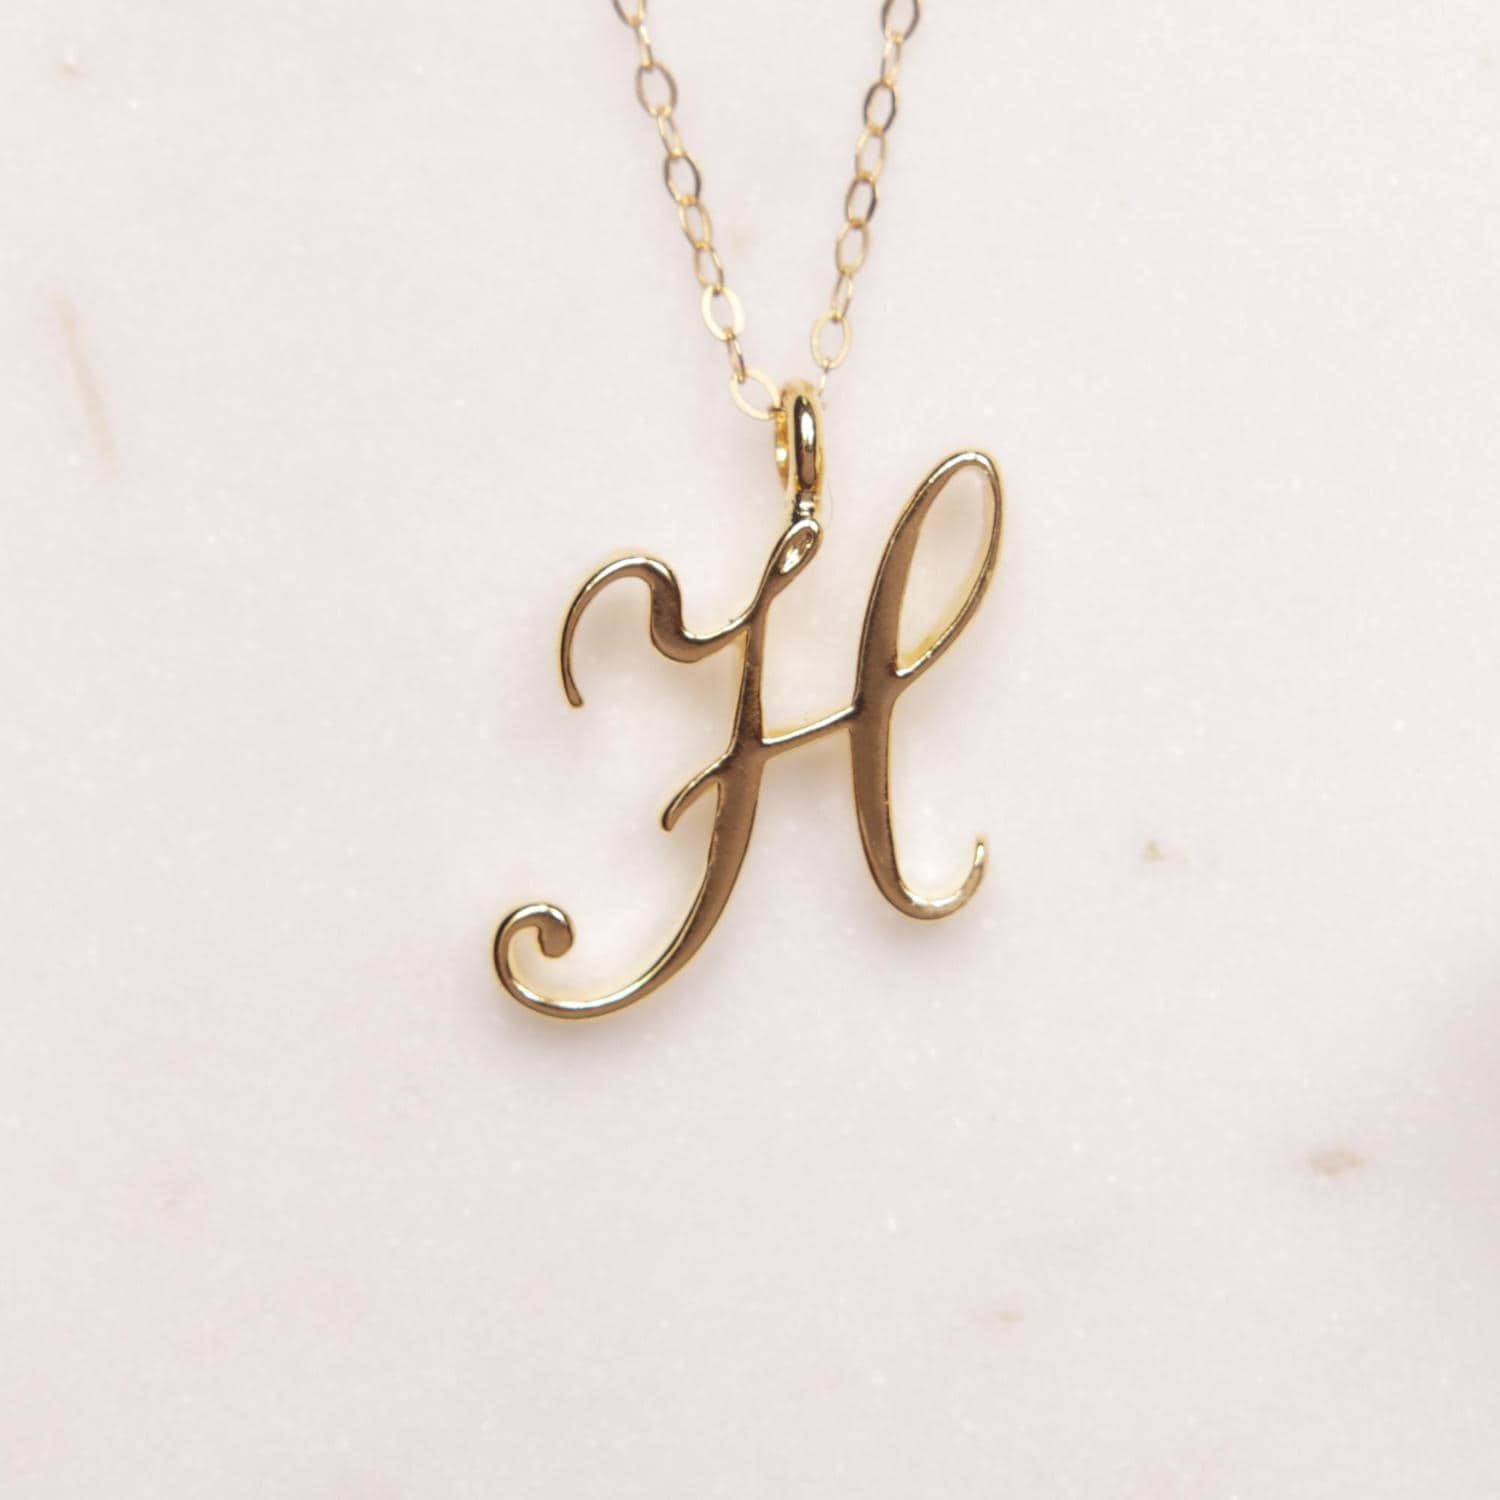 Buy Gold Plated H- Initial Pendant Necklace by MNSH Online at Aza Fashions.